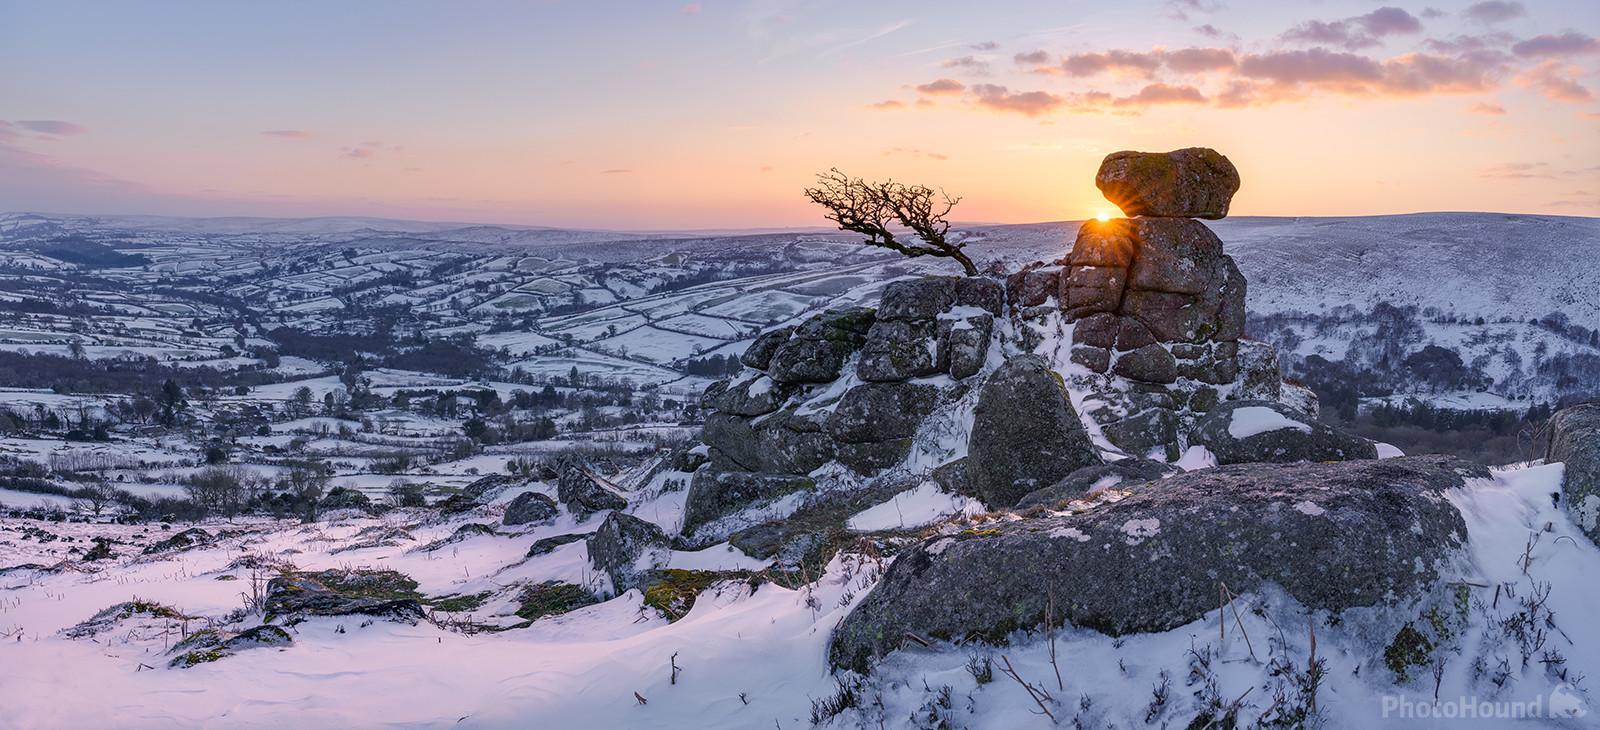 Image of Chinklwell Tor Complex by Richard Fox